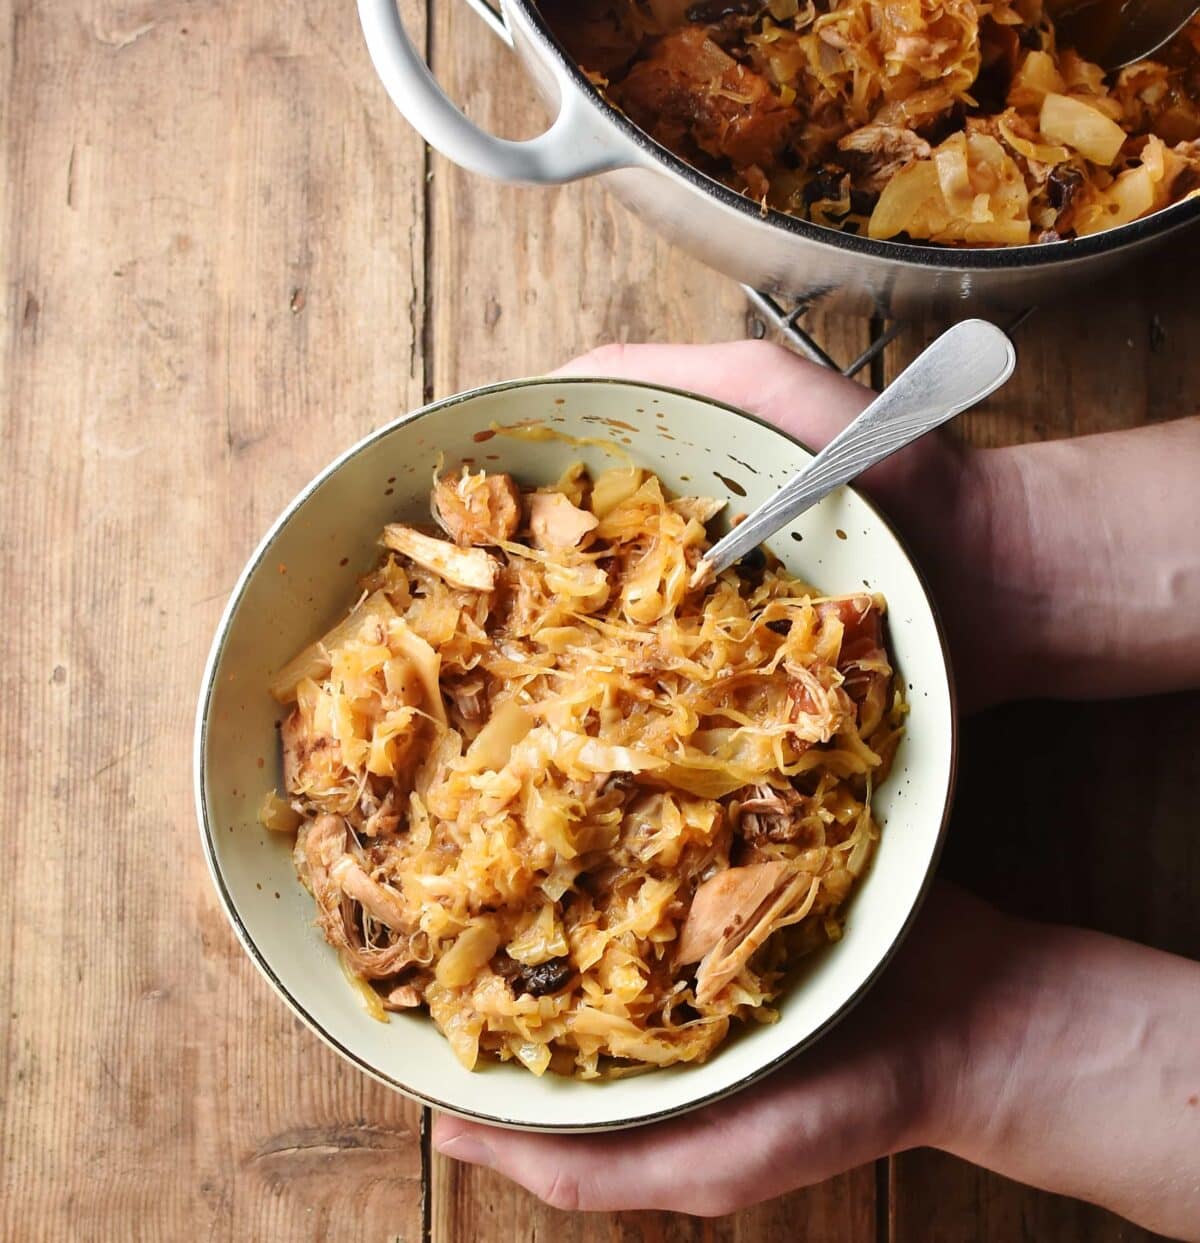 Polish bigos in green bowl with spoon held in hands, with stew in pot in background.